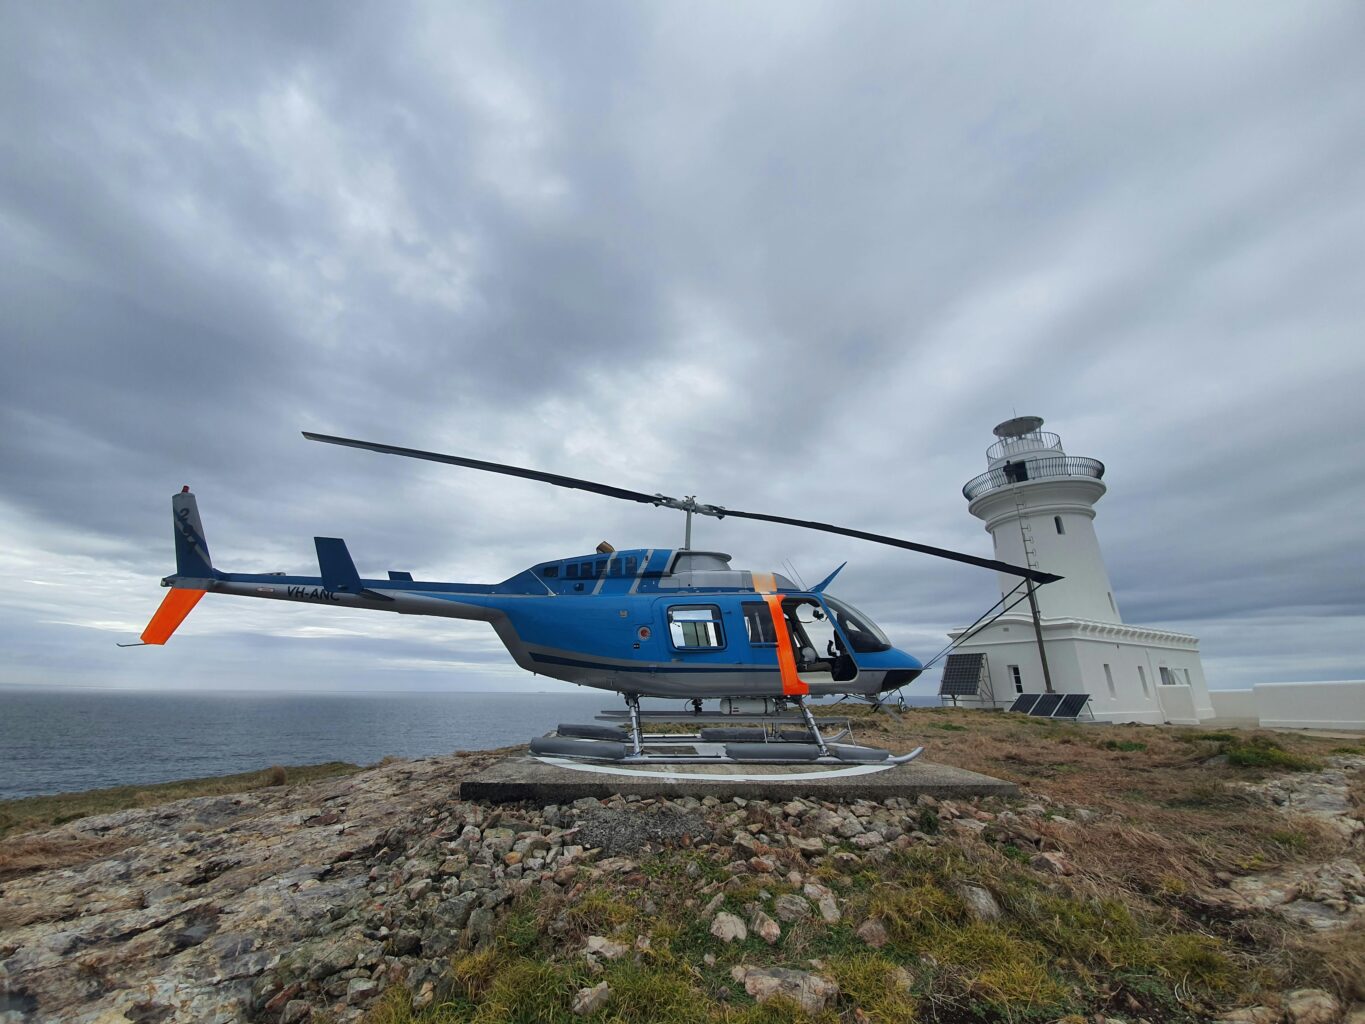 South Solitary Island Lighthouse with Helicopter, green grass and light clouds